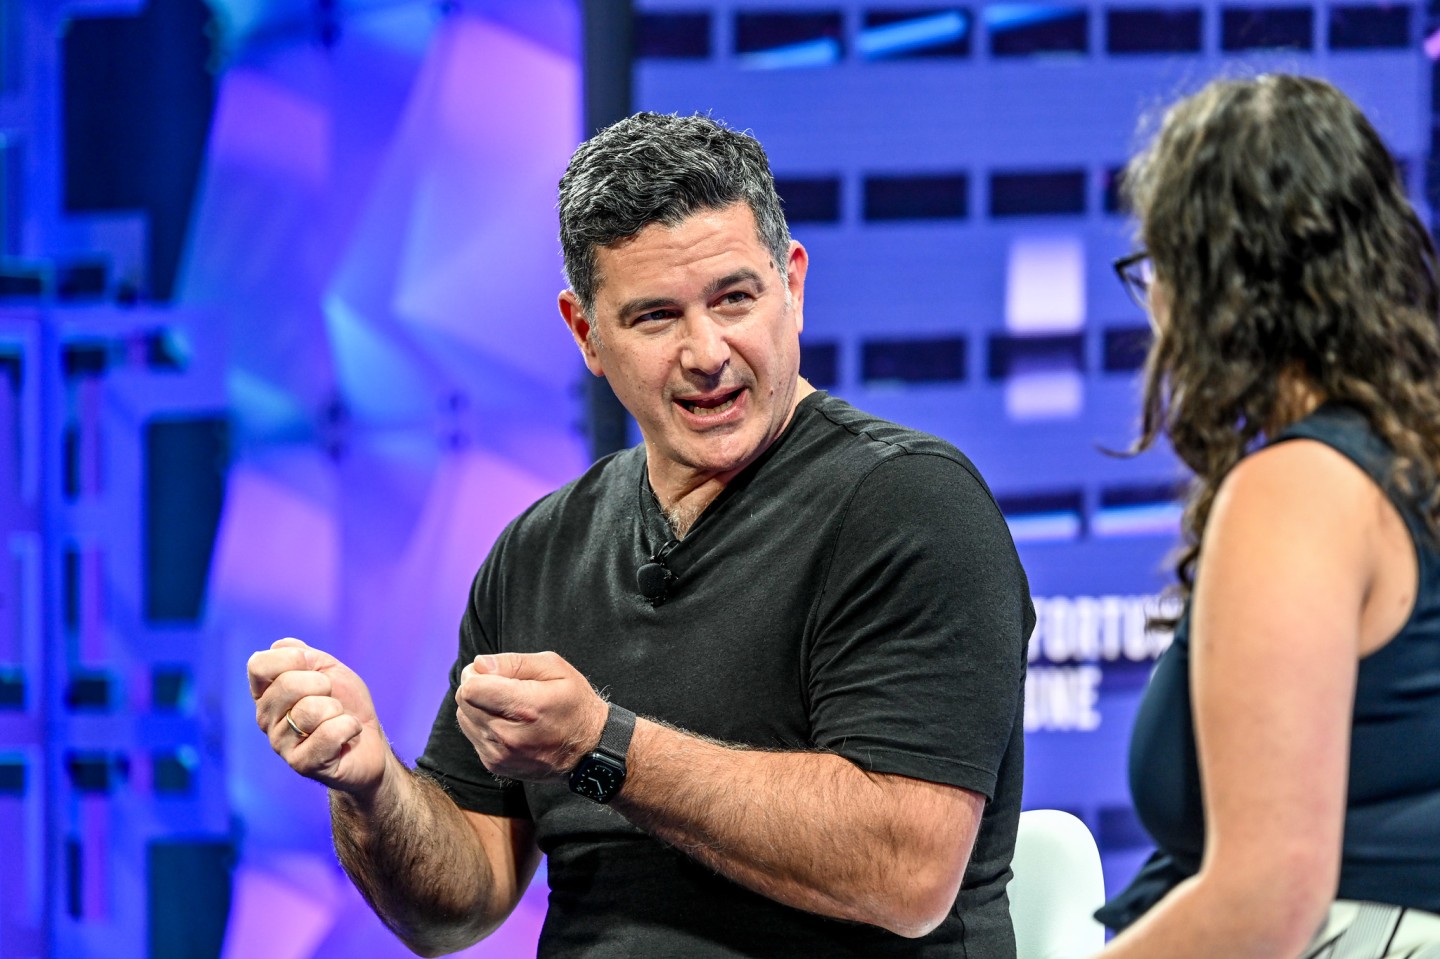 Andreas Raptopoulos, the founder and CEO of Matternet, speaks on stage at Fortune Brainstorm Tech Conference.